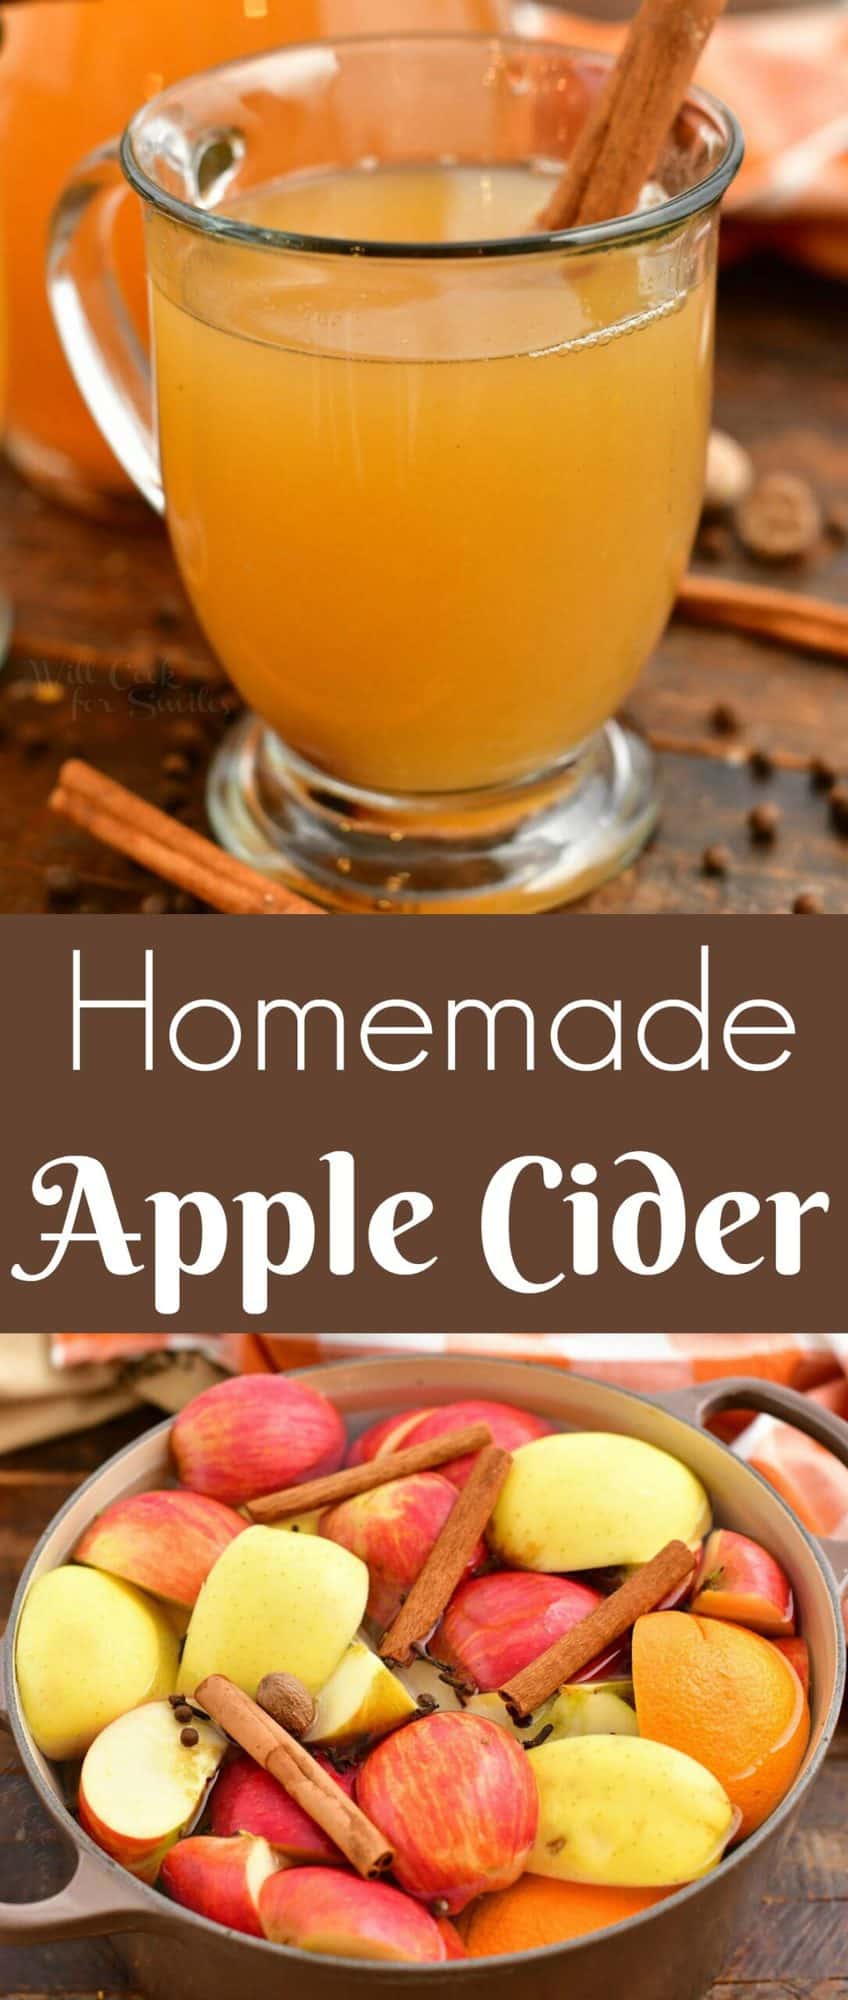 titled photo collage shows how to make apple cider